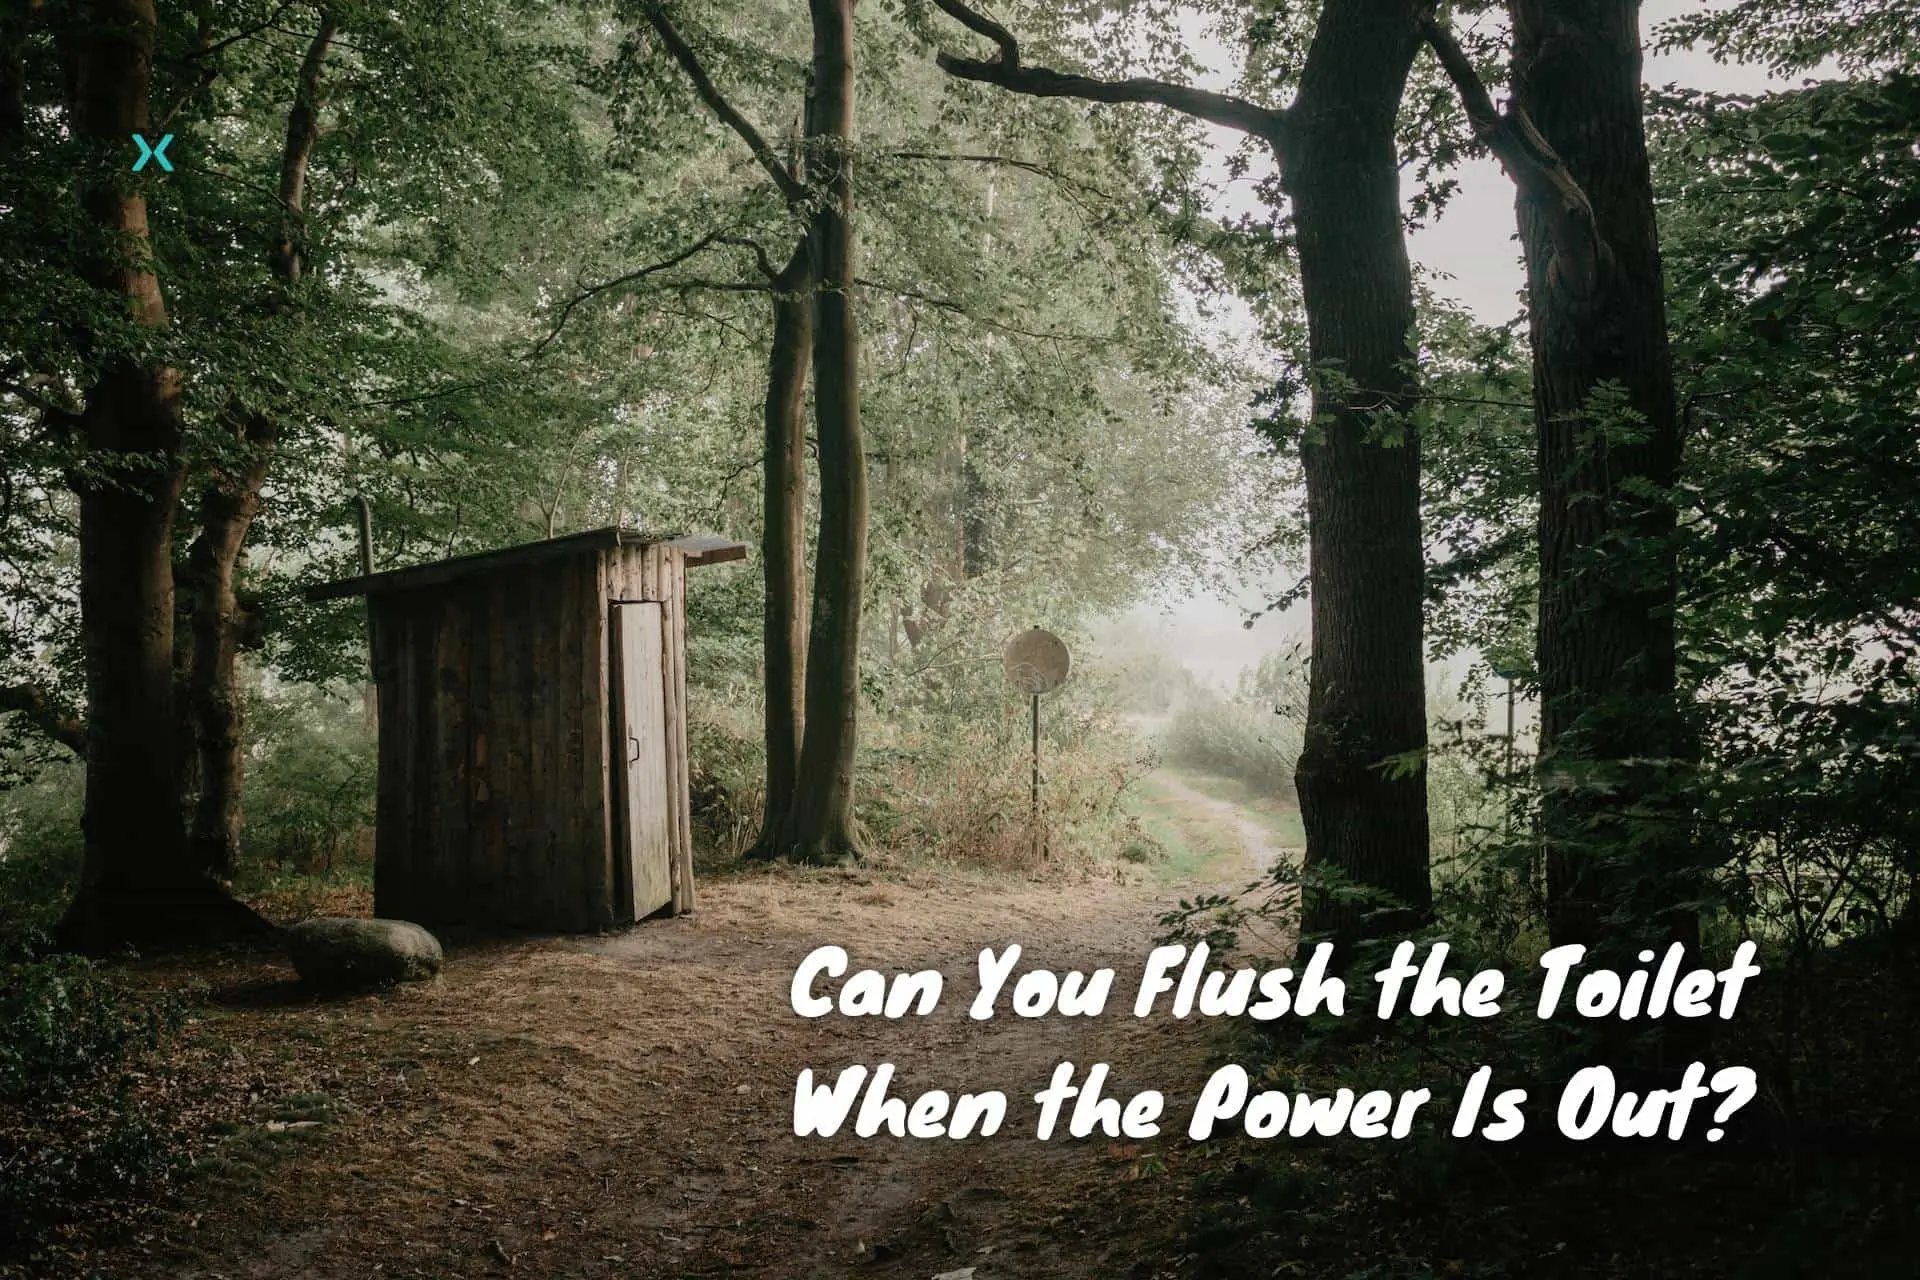 Can You Flush the Toilet When the Power Is Out